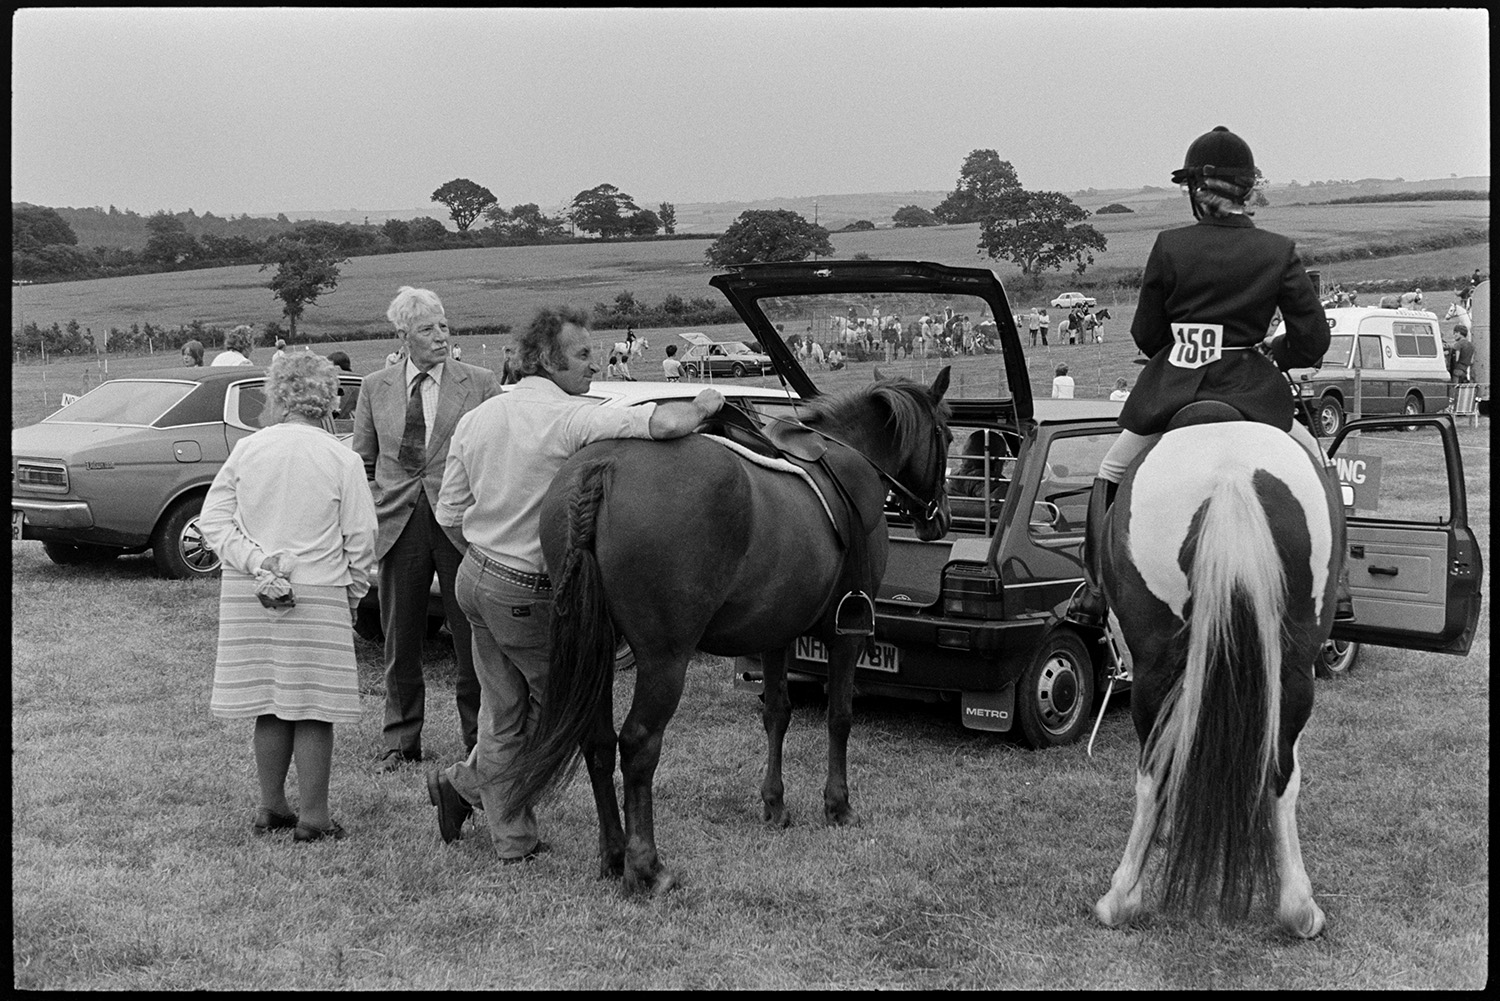 Gymkhana at Fair, horses, ponies and riders. Old bus. 
[Men, a woman and two horses gathered by a car in a field at a gymkhana at Winkleigh Fair. A rider is sat on one of the horses. Other people at the gymkhana can be seen in the background.]